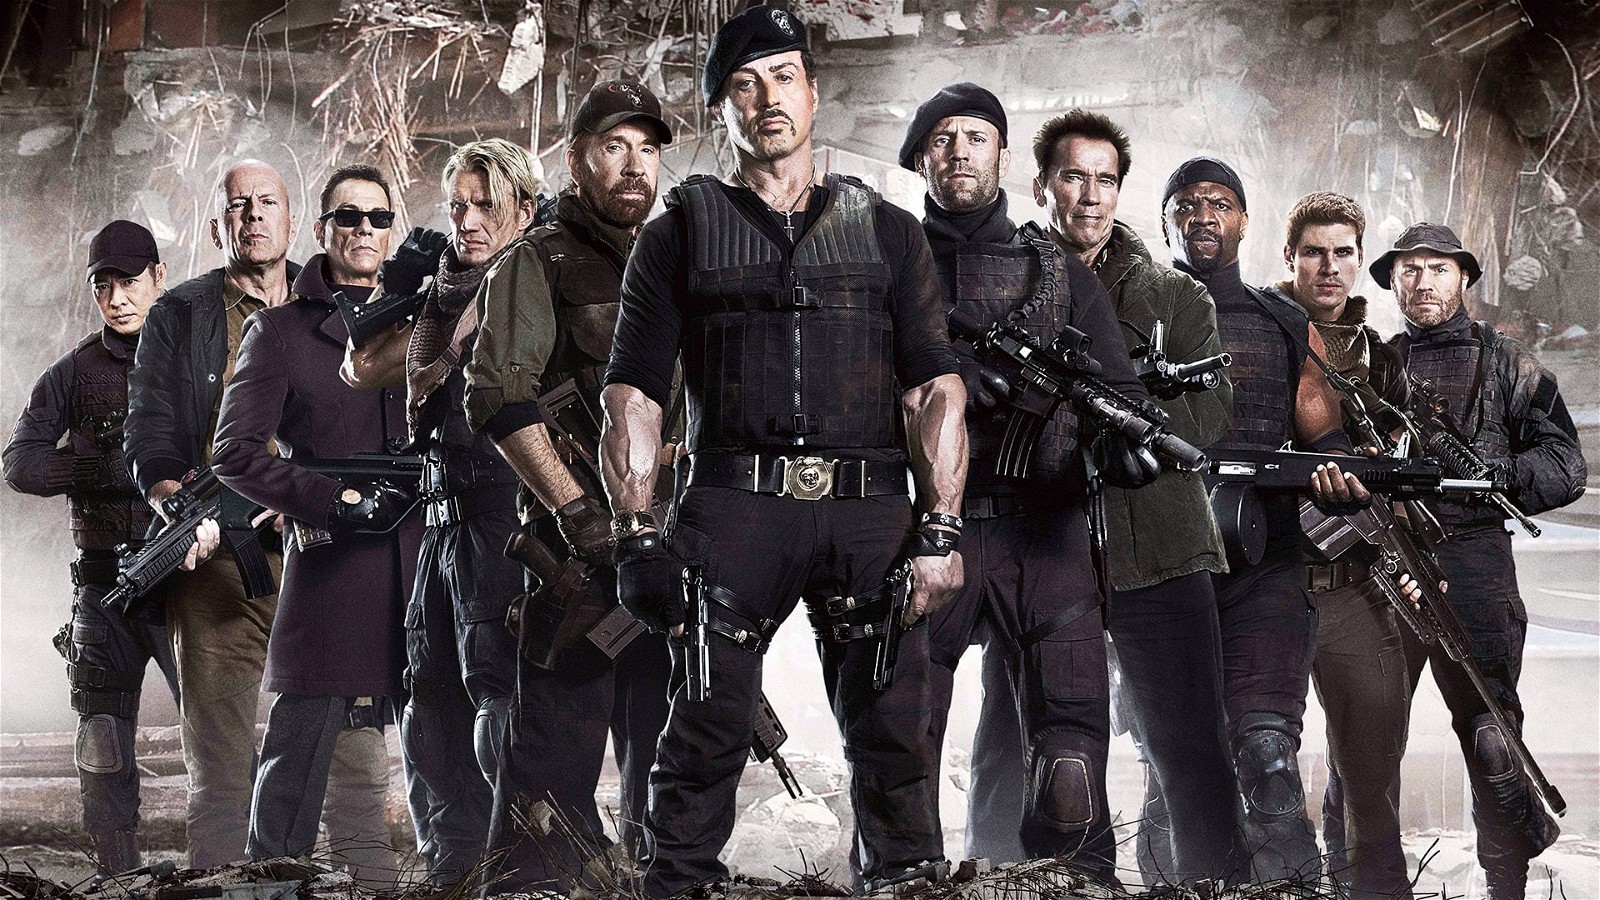 Sylvester Stallone's Expendables